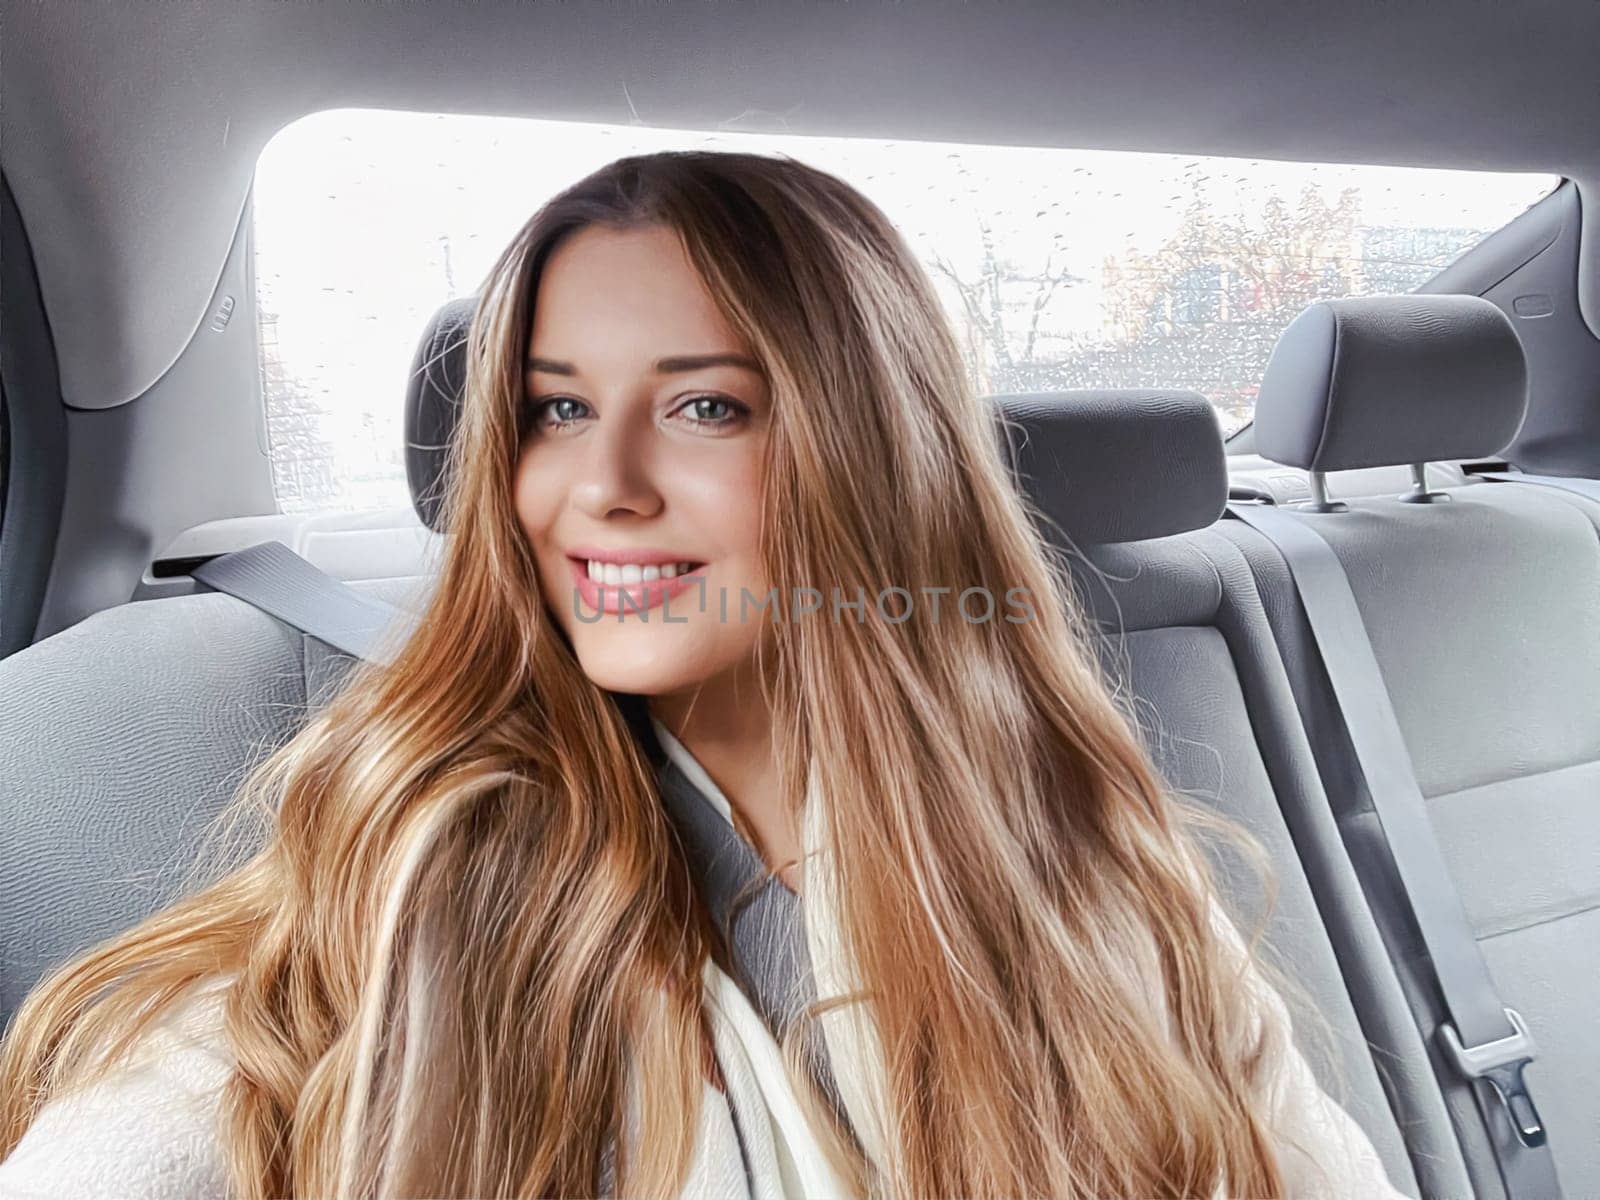 Young woman with long hair, wavy hairstyle in the car or taxi cab as passenger, exploring the city, transport and travel idea